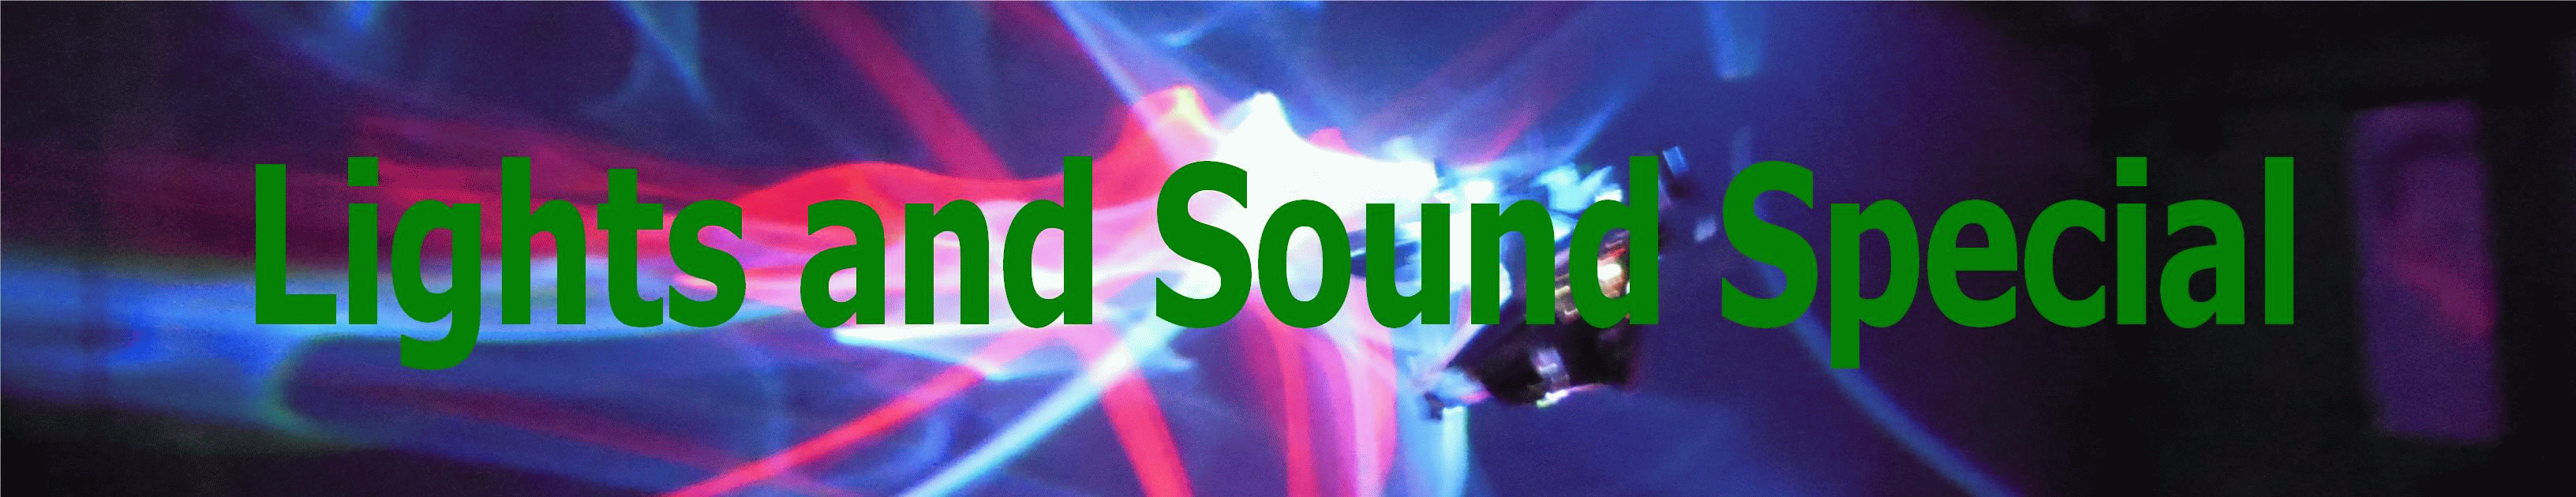 Lights and Sound Special